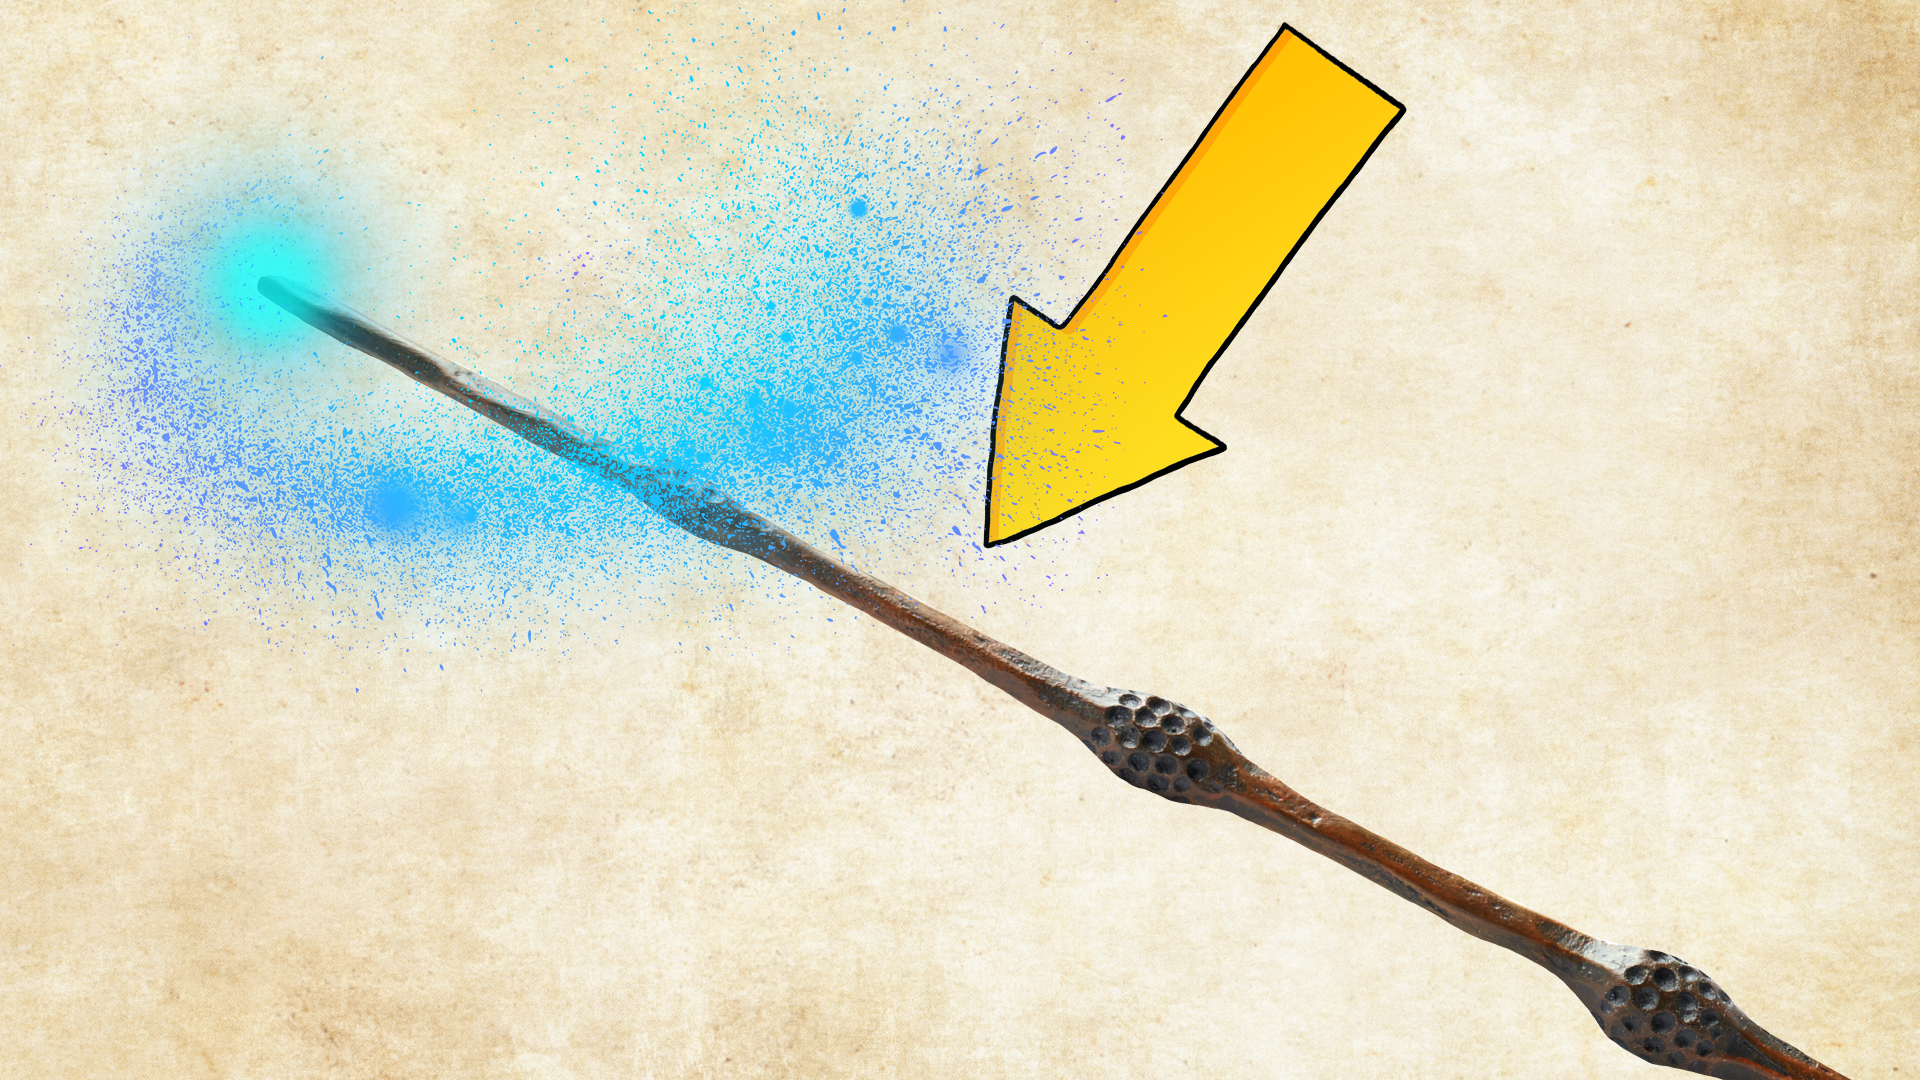 Magic wand and arrow on parchment background